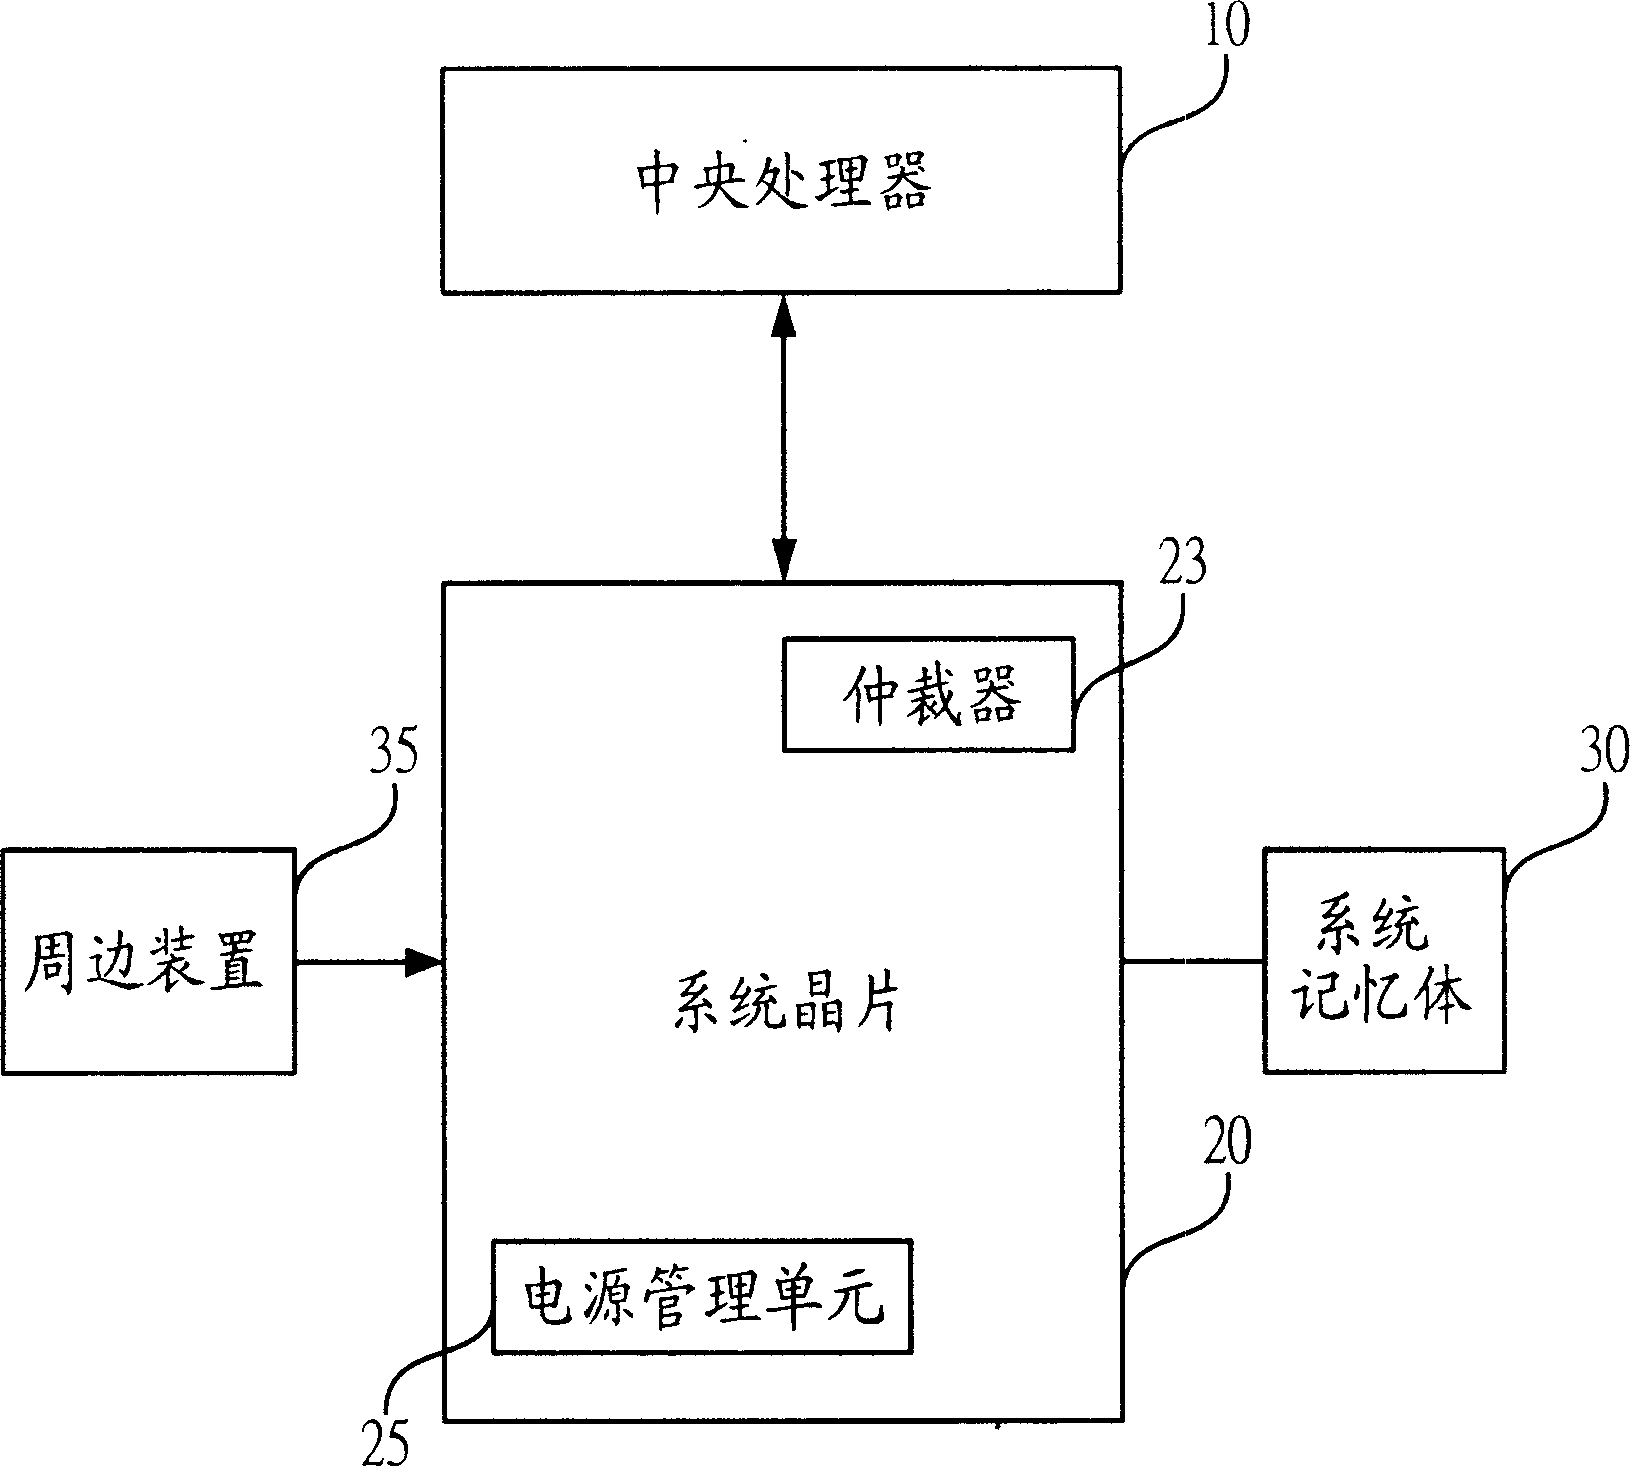 Electricity-saving method and system for central processor